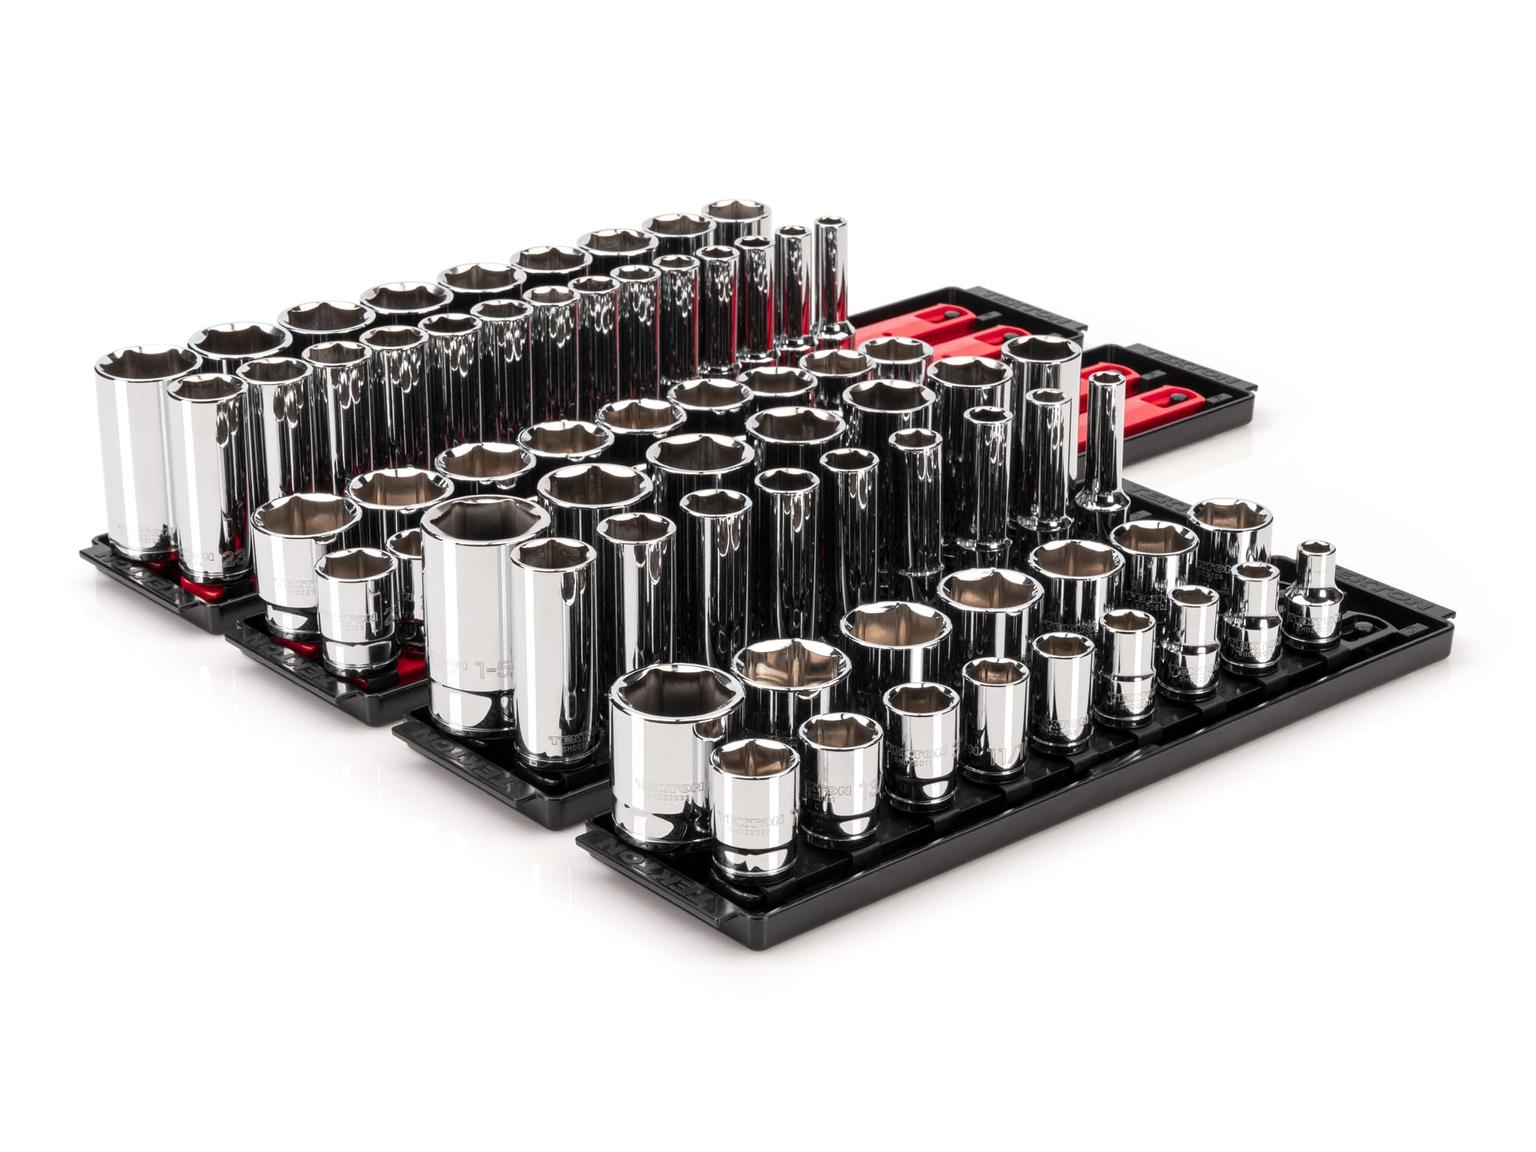 TEKTON SHD92215-T 1/2 Inch Drive 6-Point Socket Set with Rails, 78-Piece (3/8-1-5/16 in., 10-32 mm)